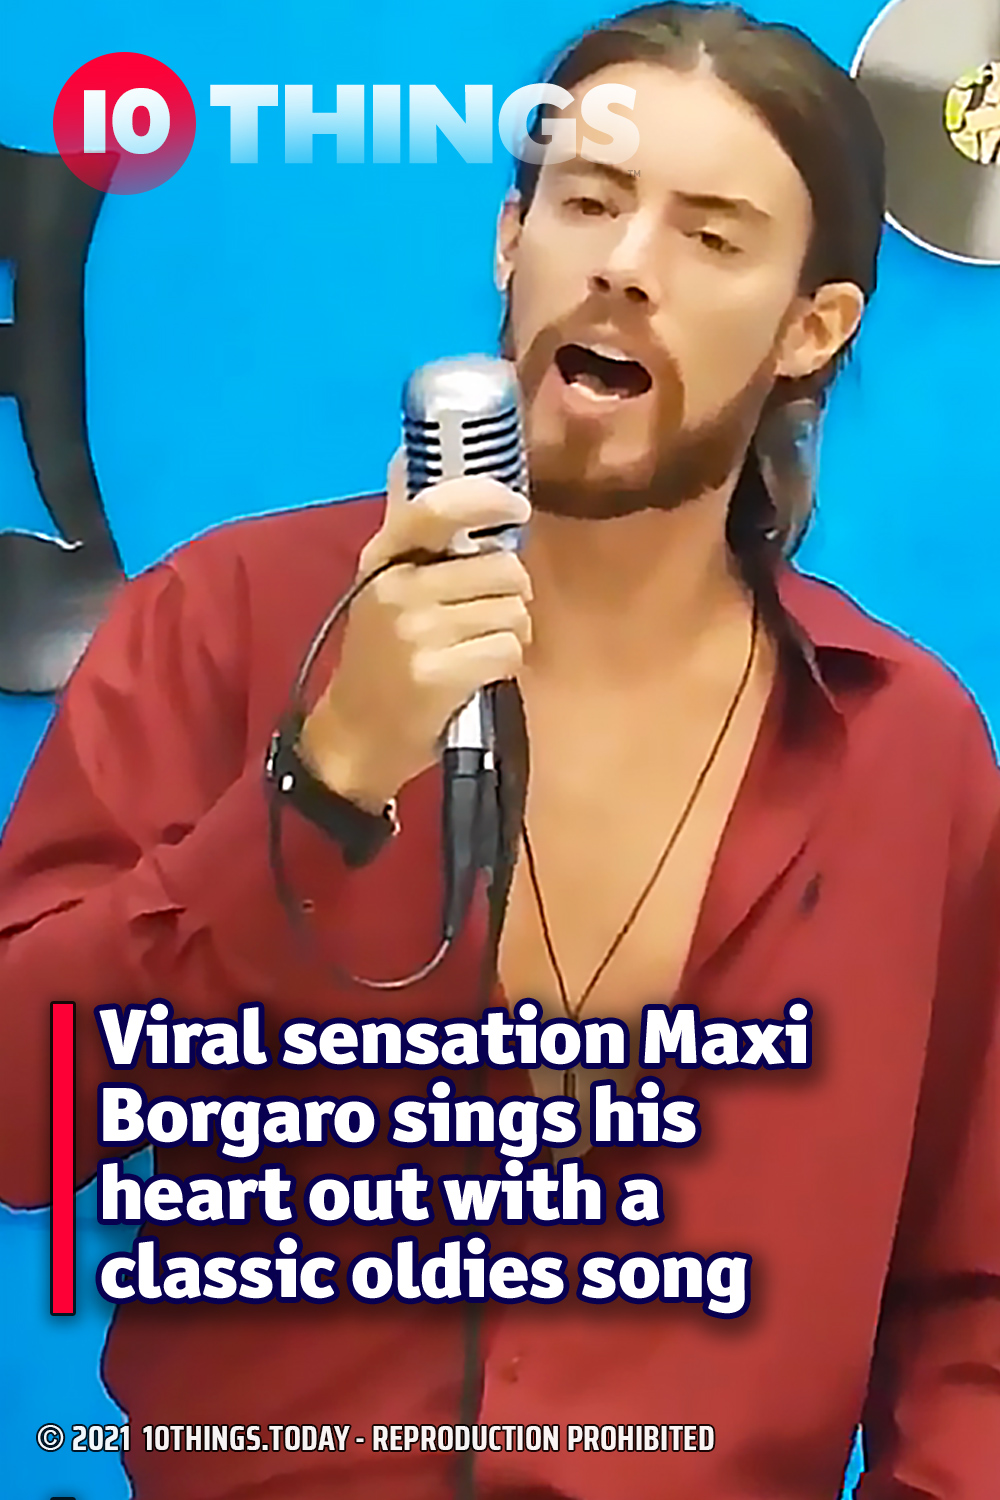 Viral sensation Maxi Borgaro sings his heart out with a classic oldies song